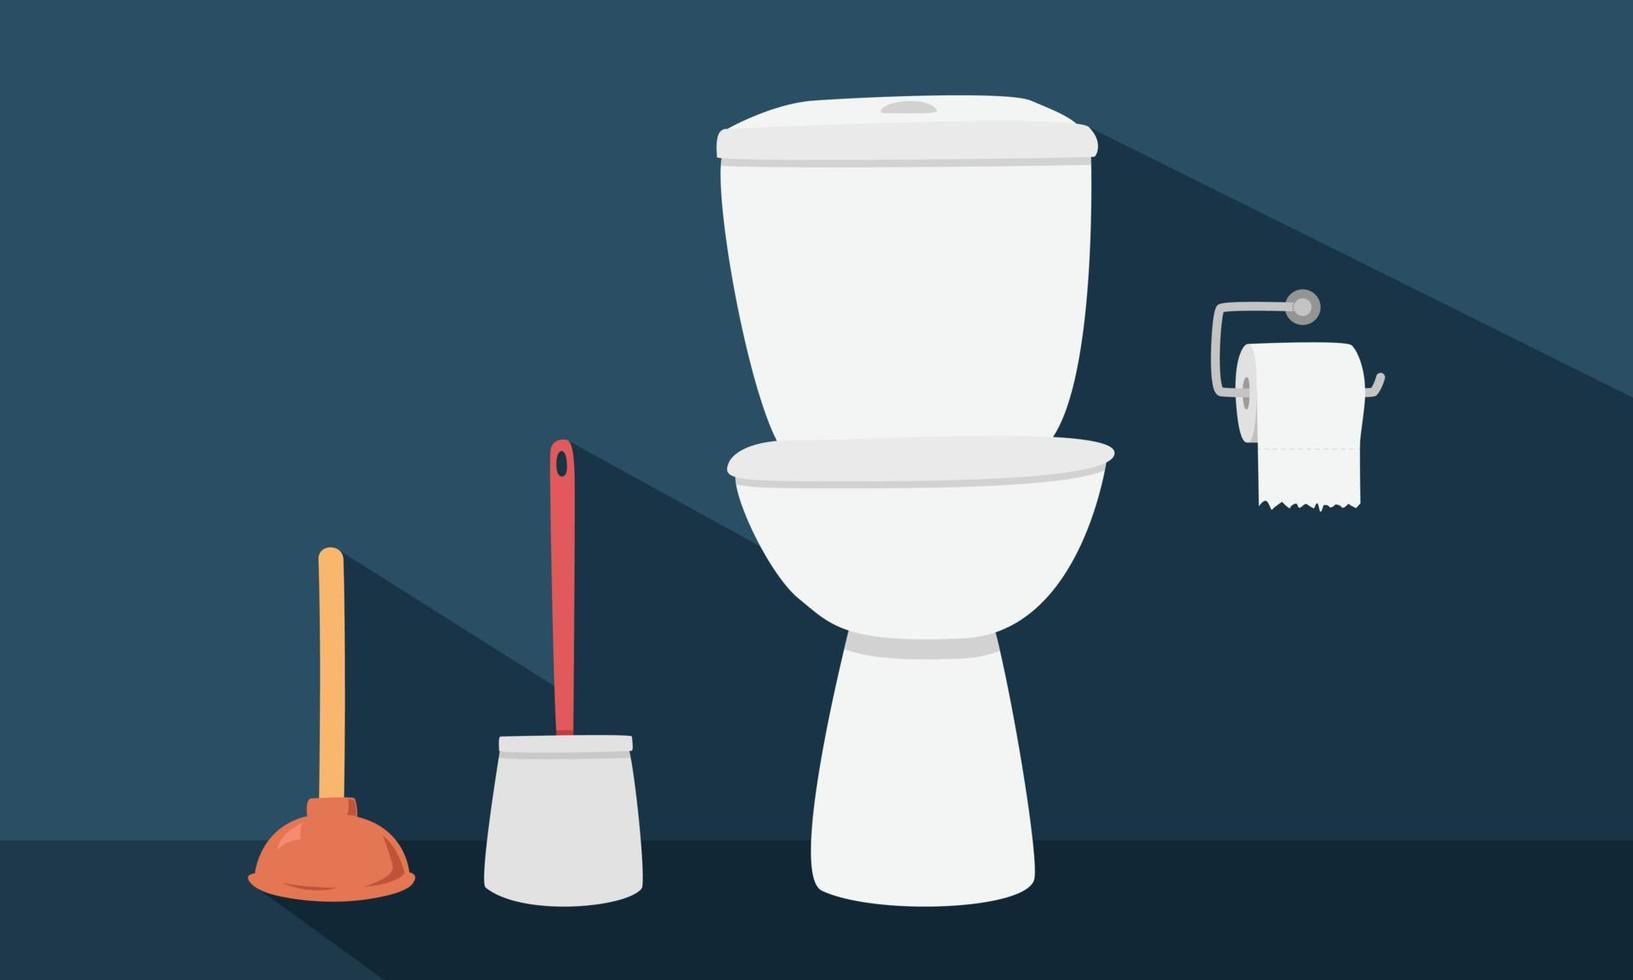 Set of toilet bowl, toilet paper roll, toilet brush, and plunger with long shadow in flat style vector illustration. Simple restroom or toilet elements clipart cartoon hand drawn doodle style